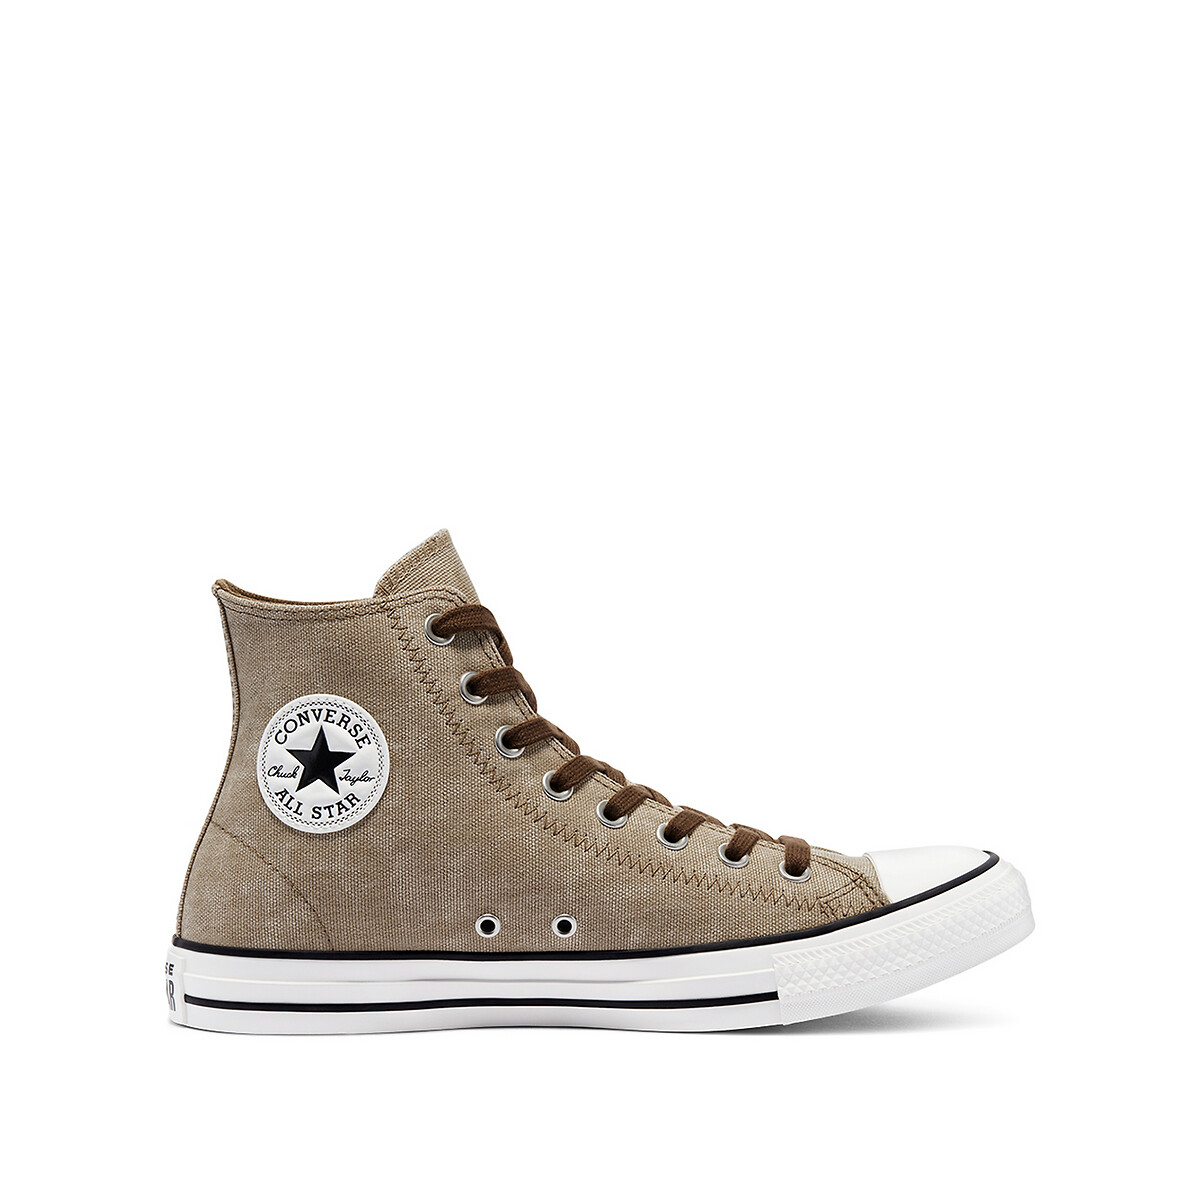 Chuck taylor all star washed canvas high top trainers , khaki/beige ...